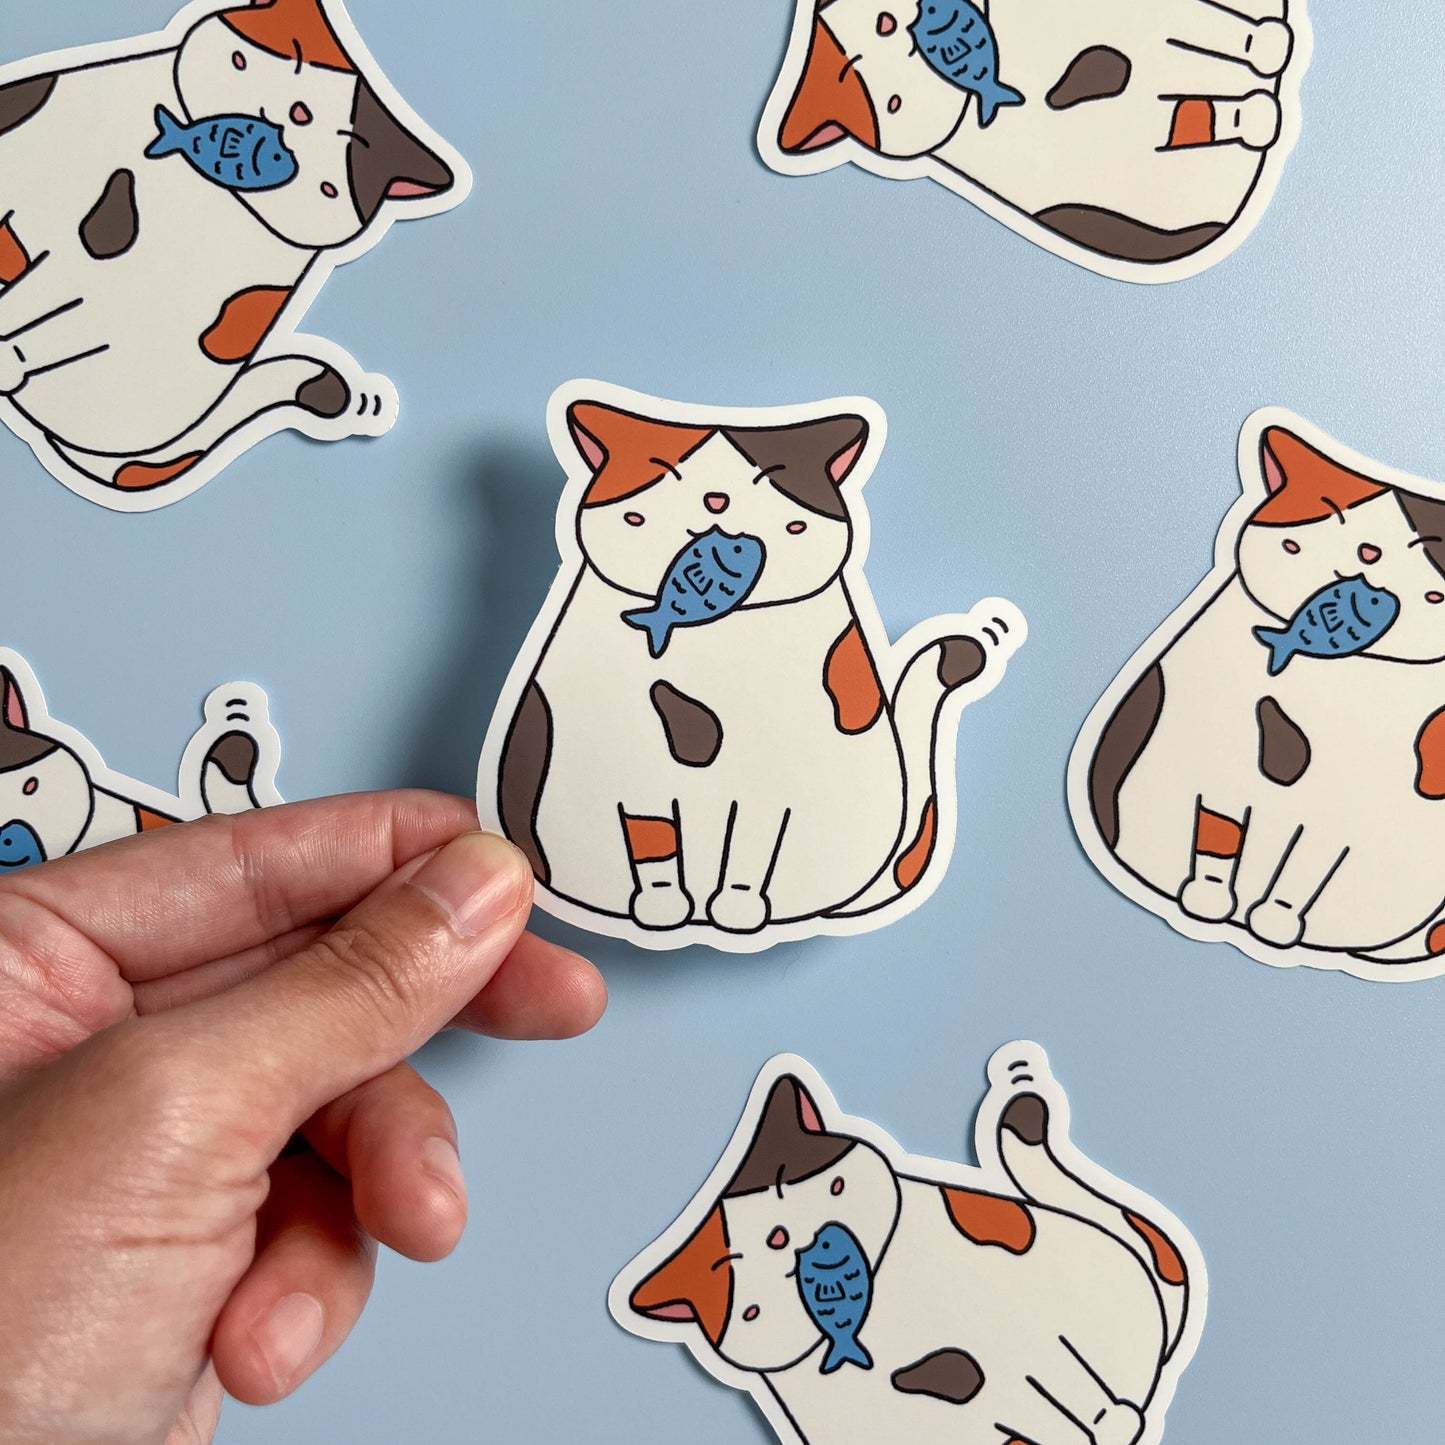 Calico Cat With Fish Sticker